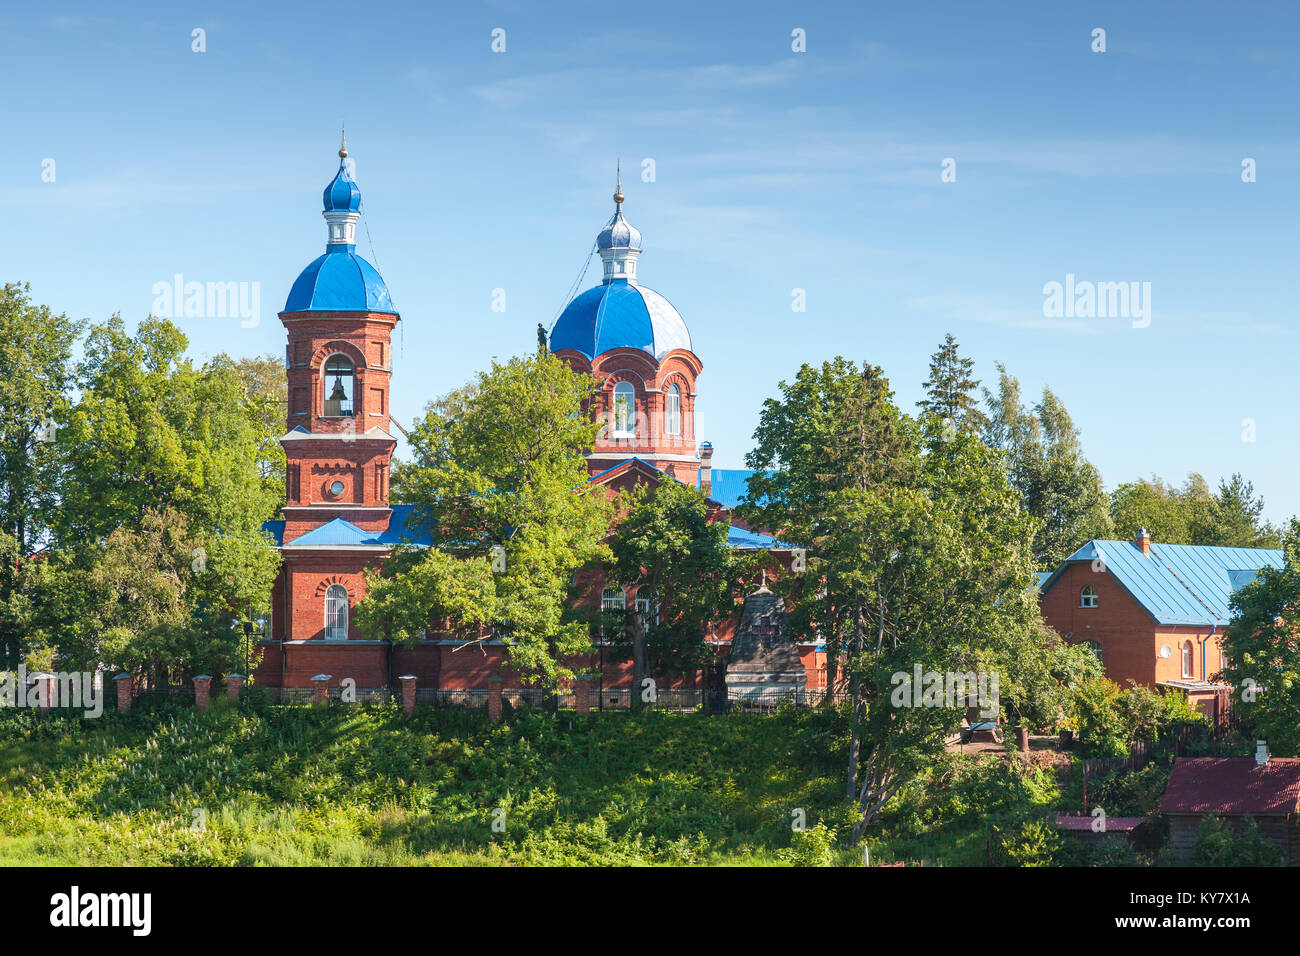 Rozhdestveno, Russia - July 11, 2014: Church of the Nativity of the Blessed Virgin Mary on summer day, worker repairs roof Stock Photo